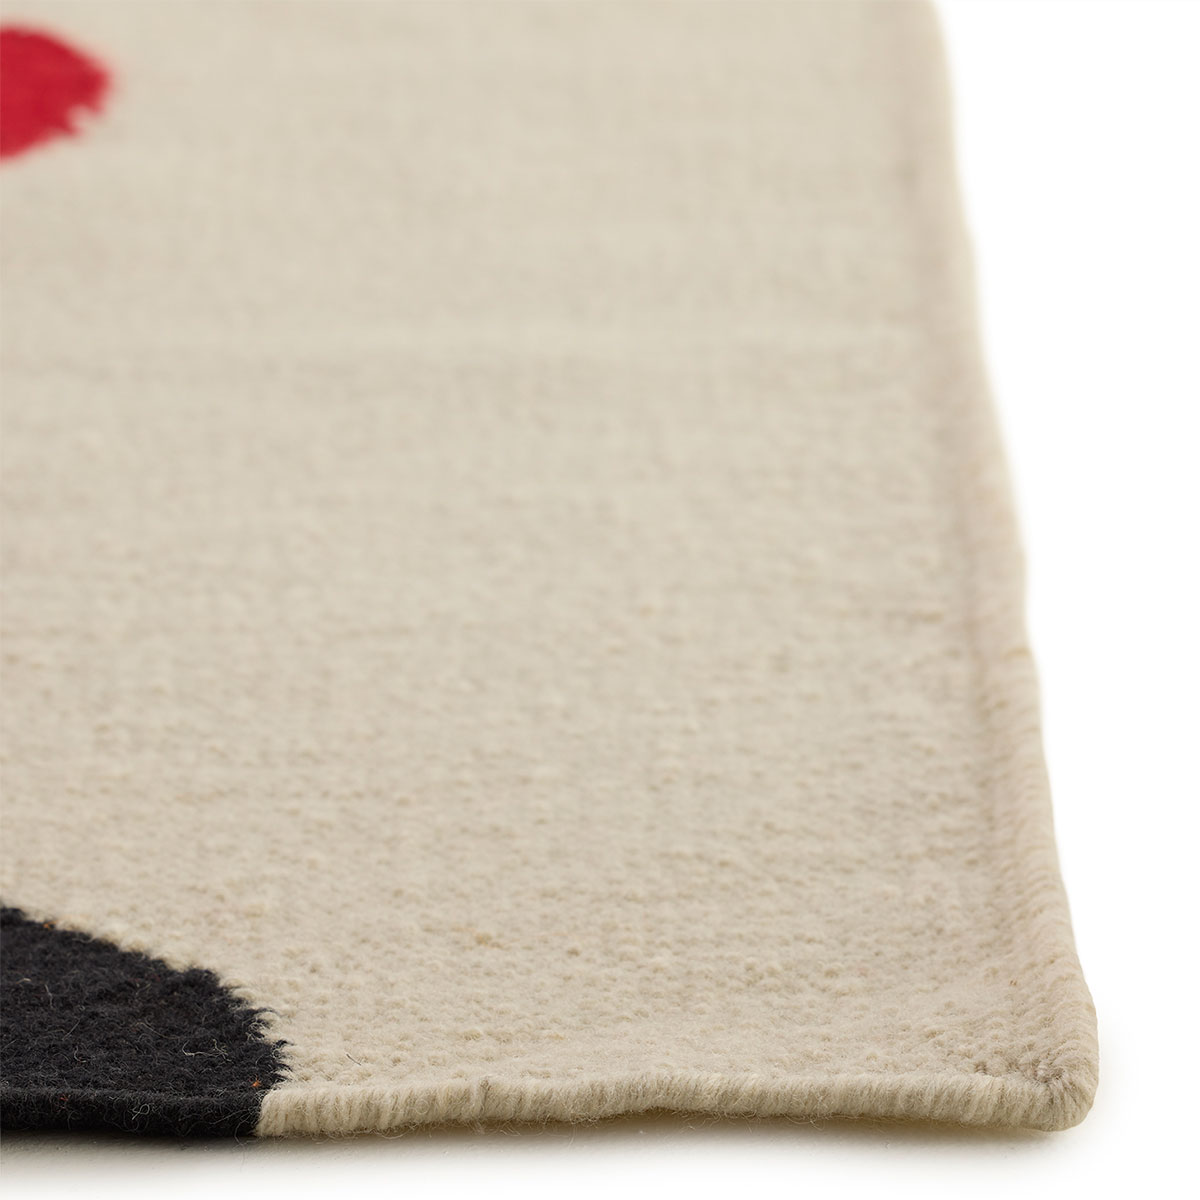 The corner detail of an abstract square red heart, and beige background rug named Love Blossom Crush.